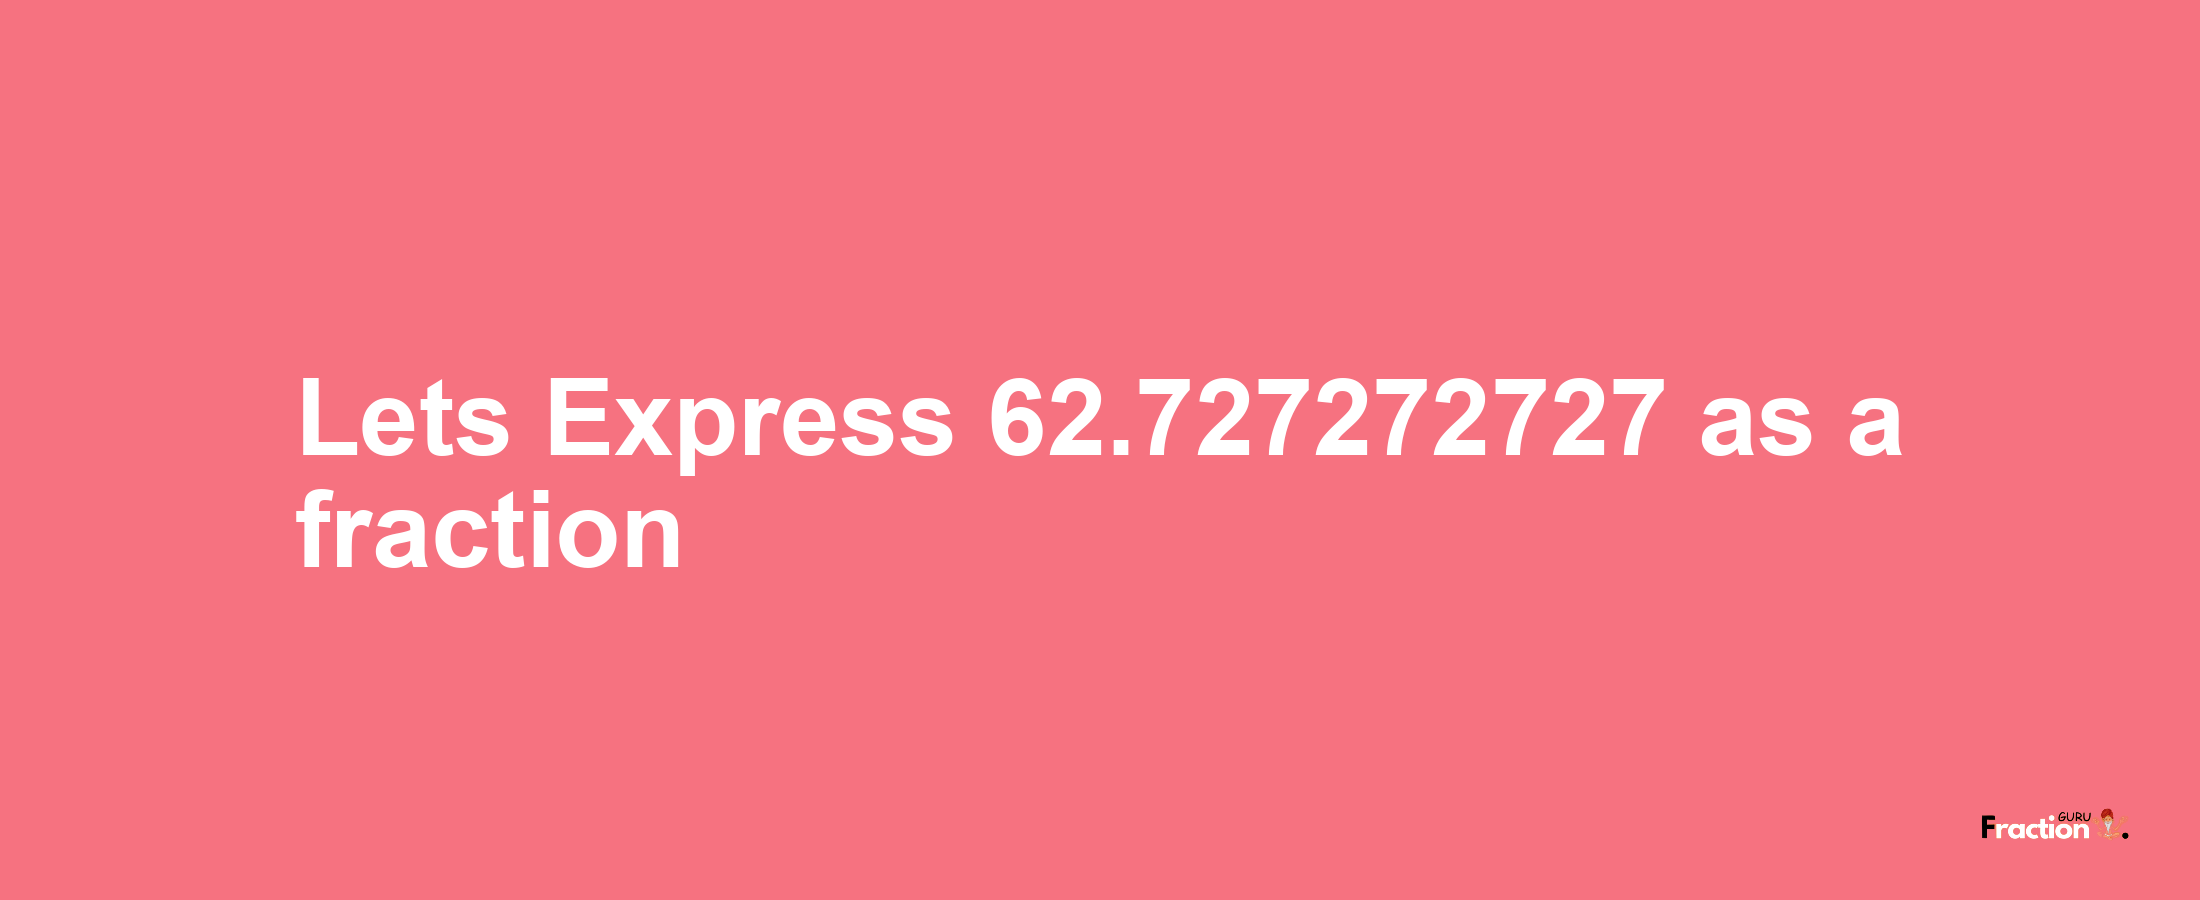 Lets Express 62.727272727 as afraction